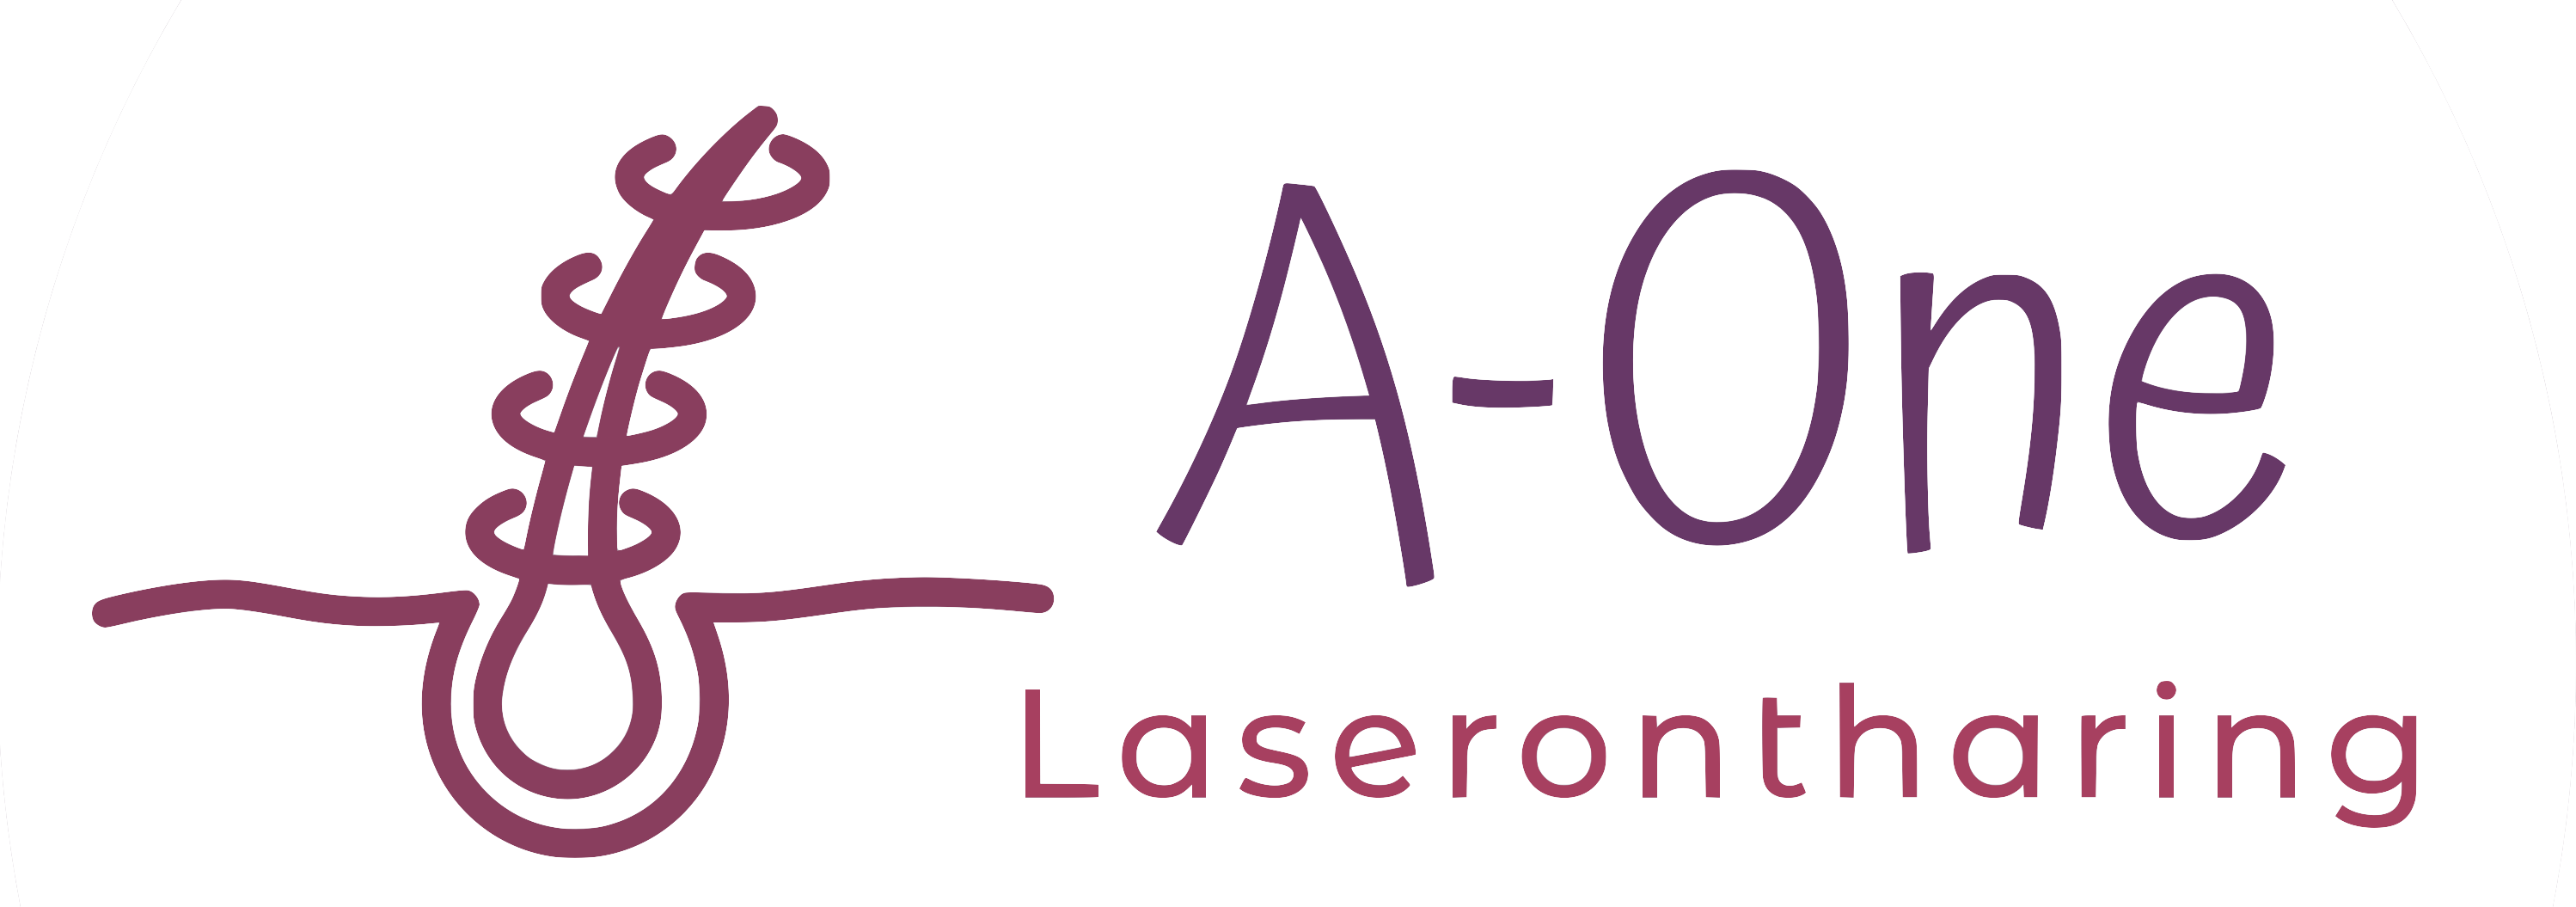 A-One Laserontharing